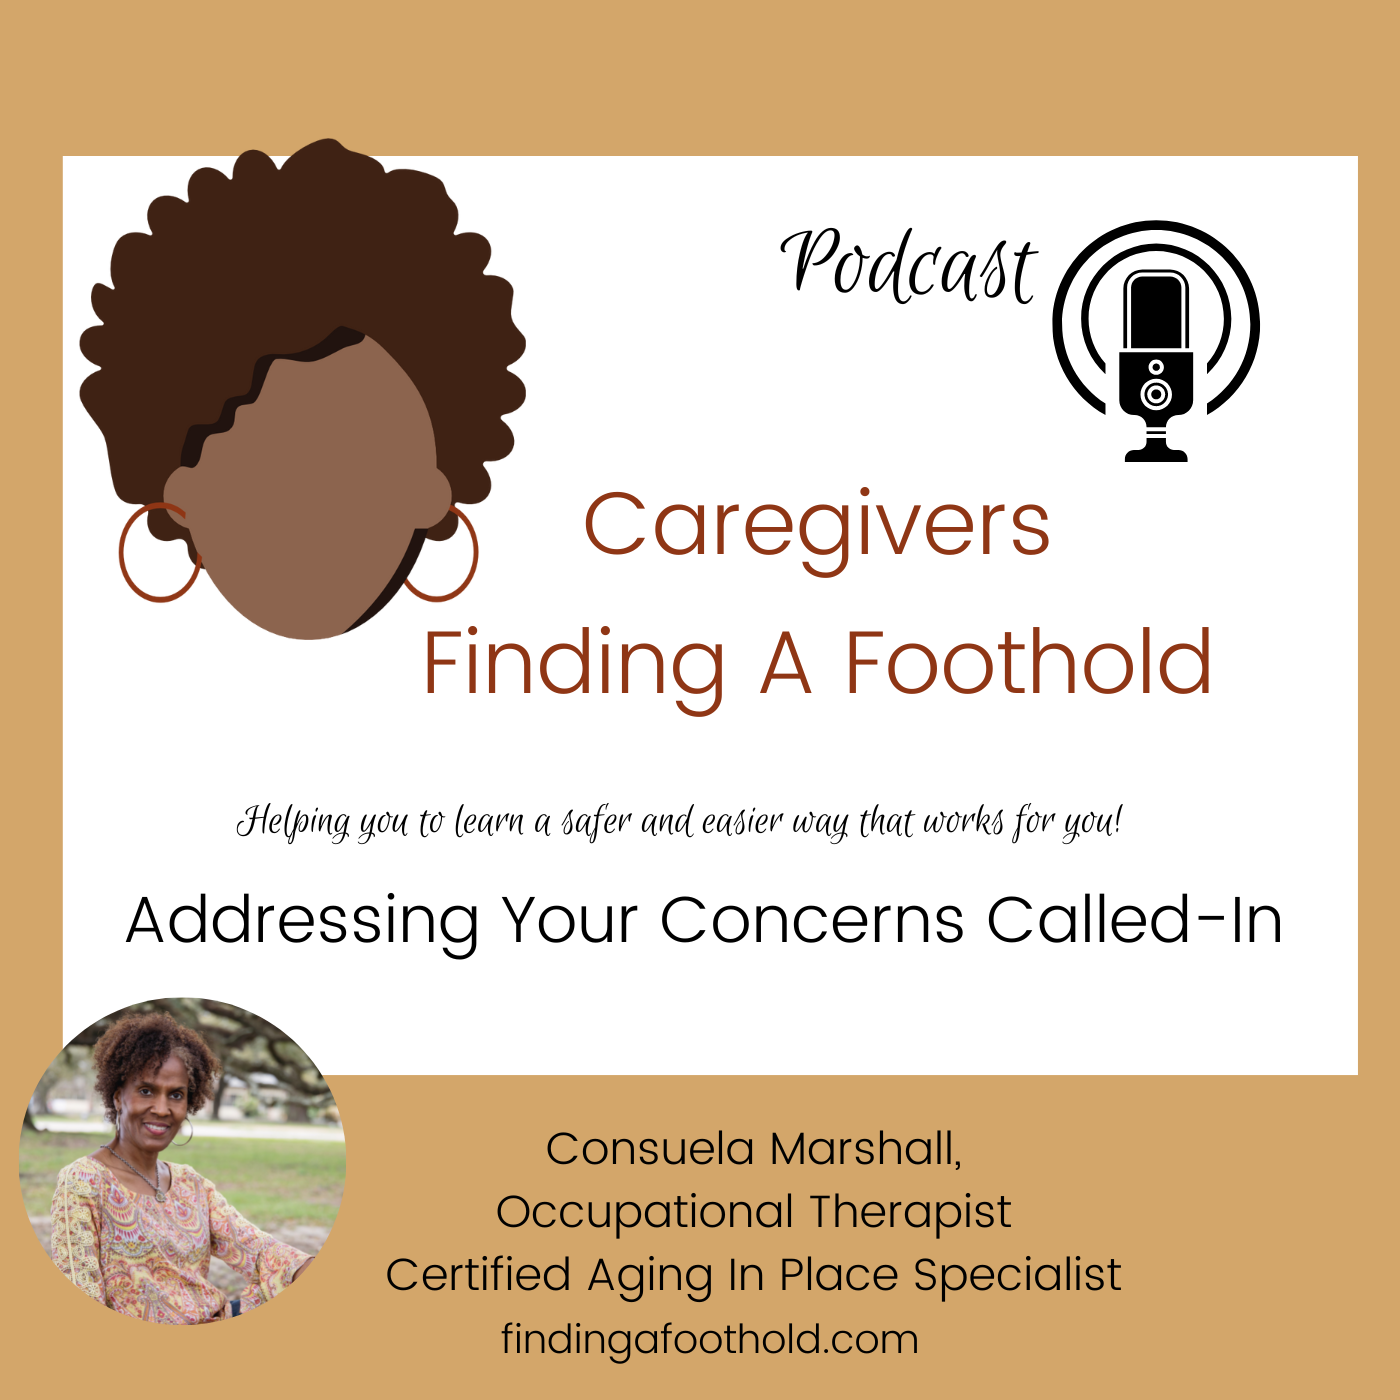 https://thewholecarenetwork.com/wp-content/uploads/2023/04/Artwork-of-Caregivers-Finding-A-Foothold.png